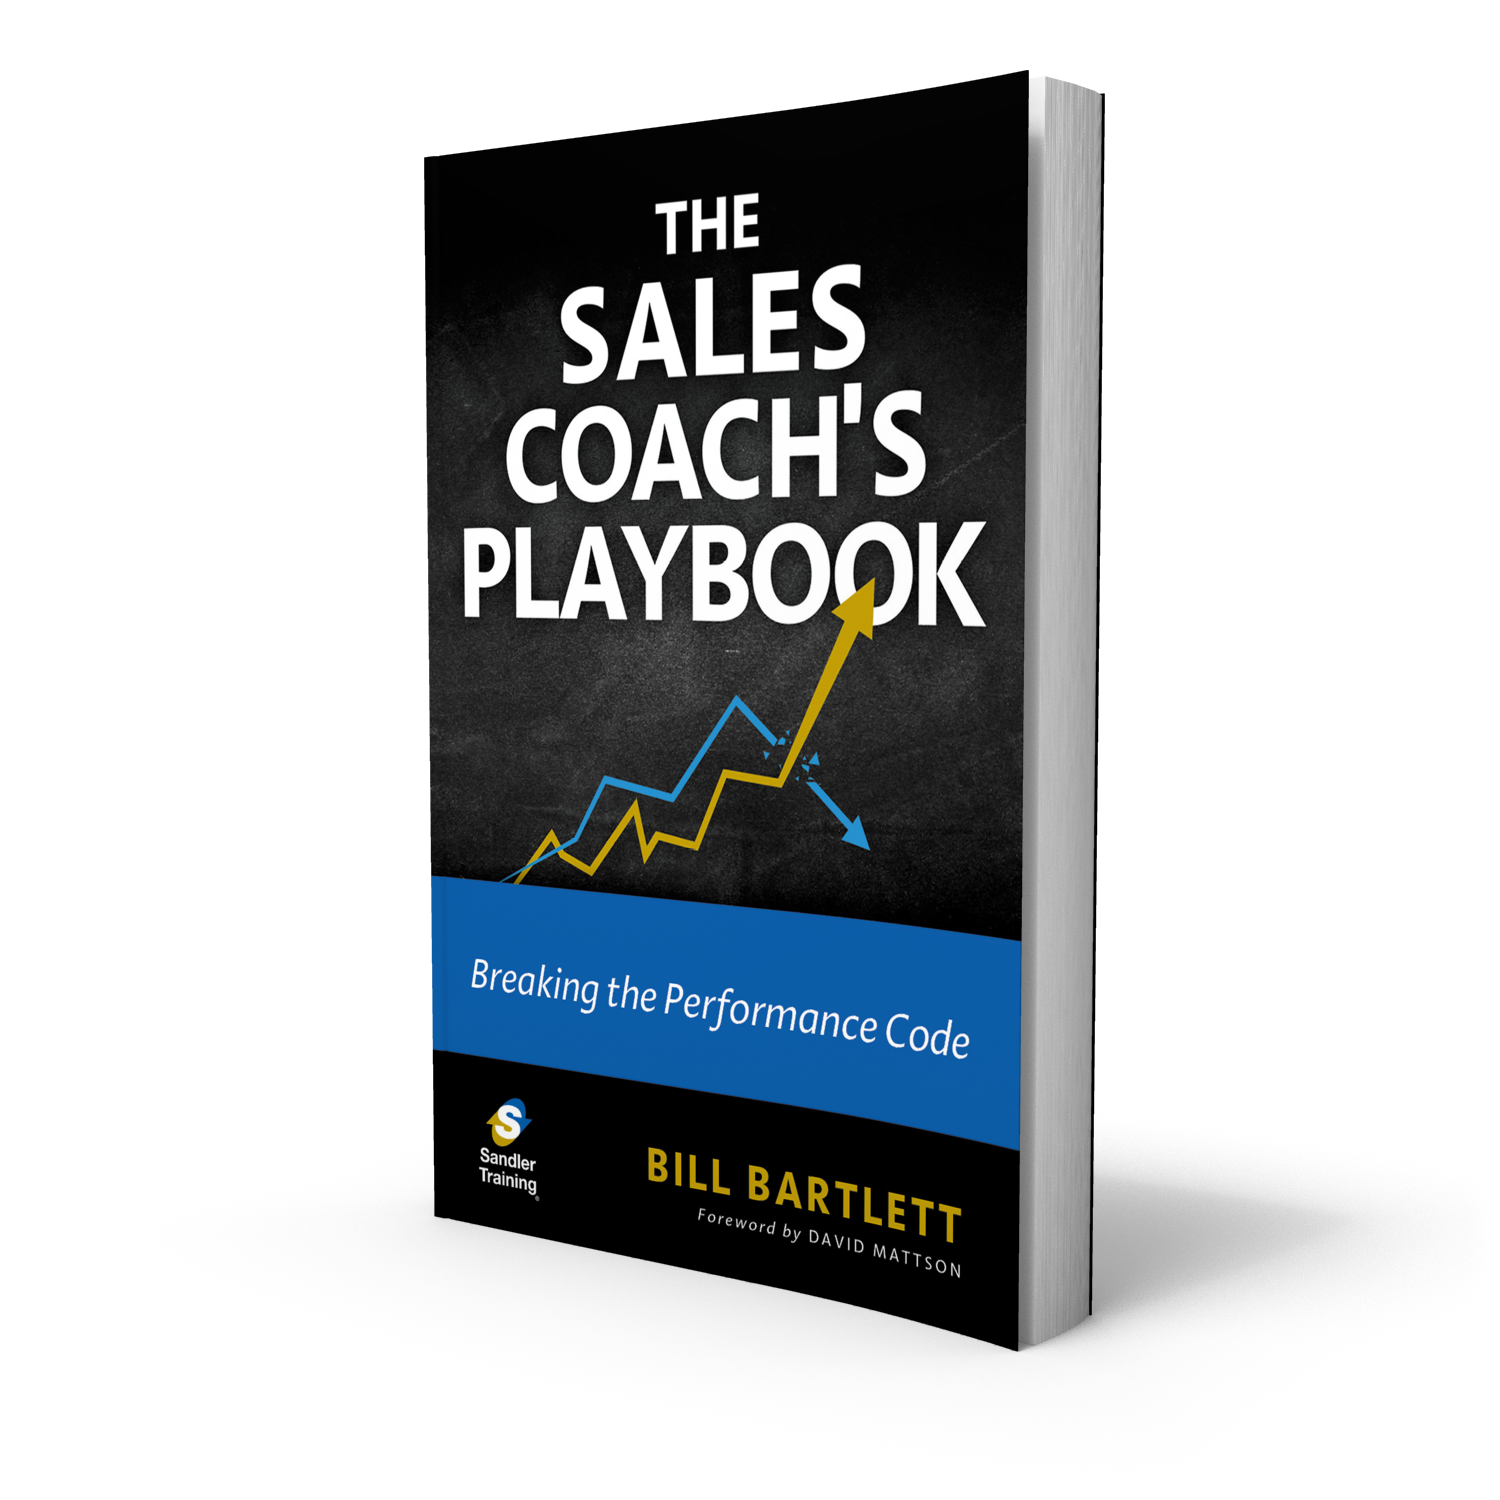 The sales book.